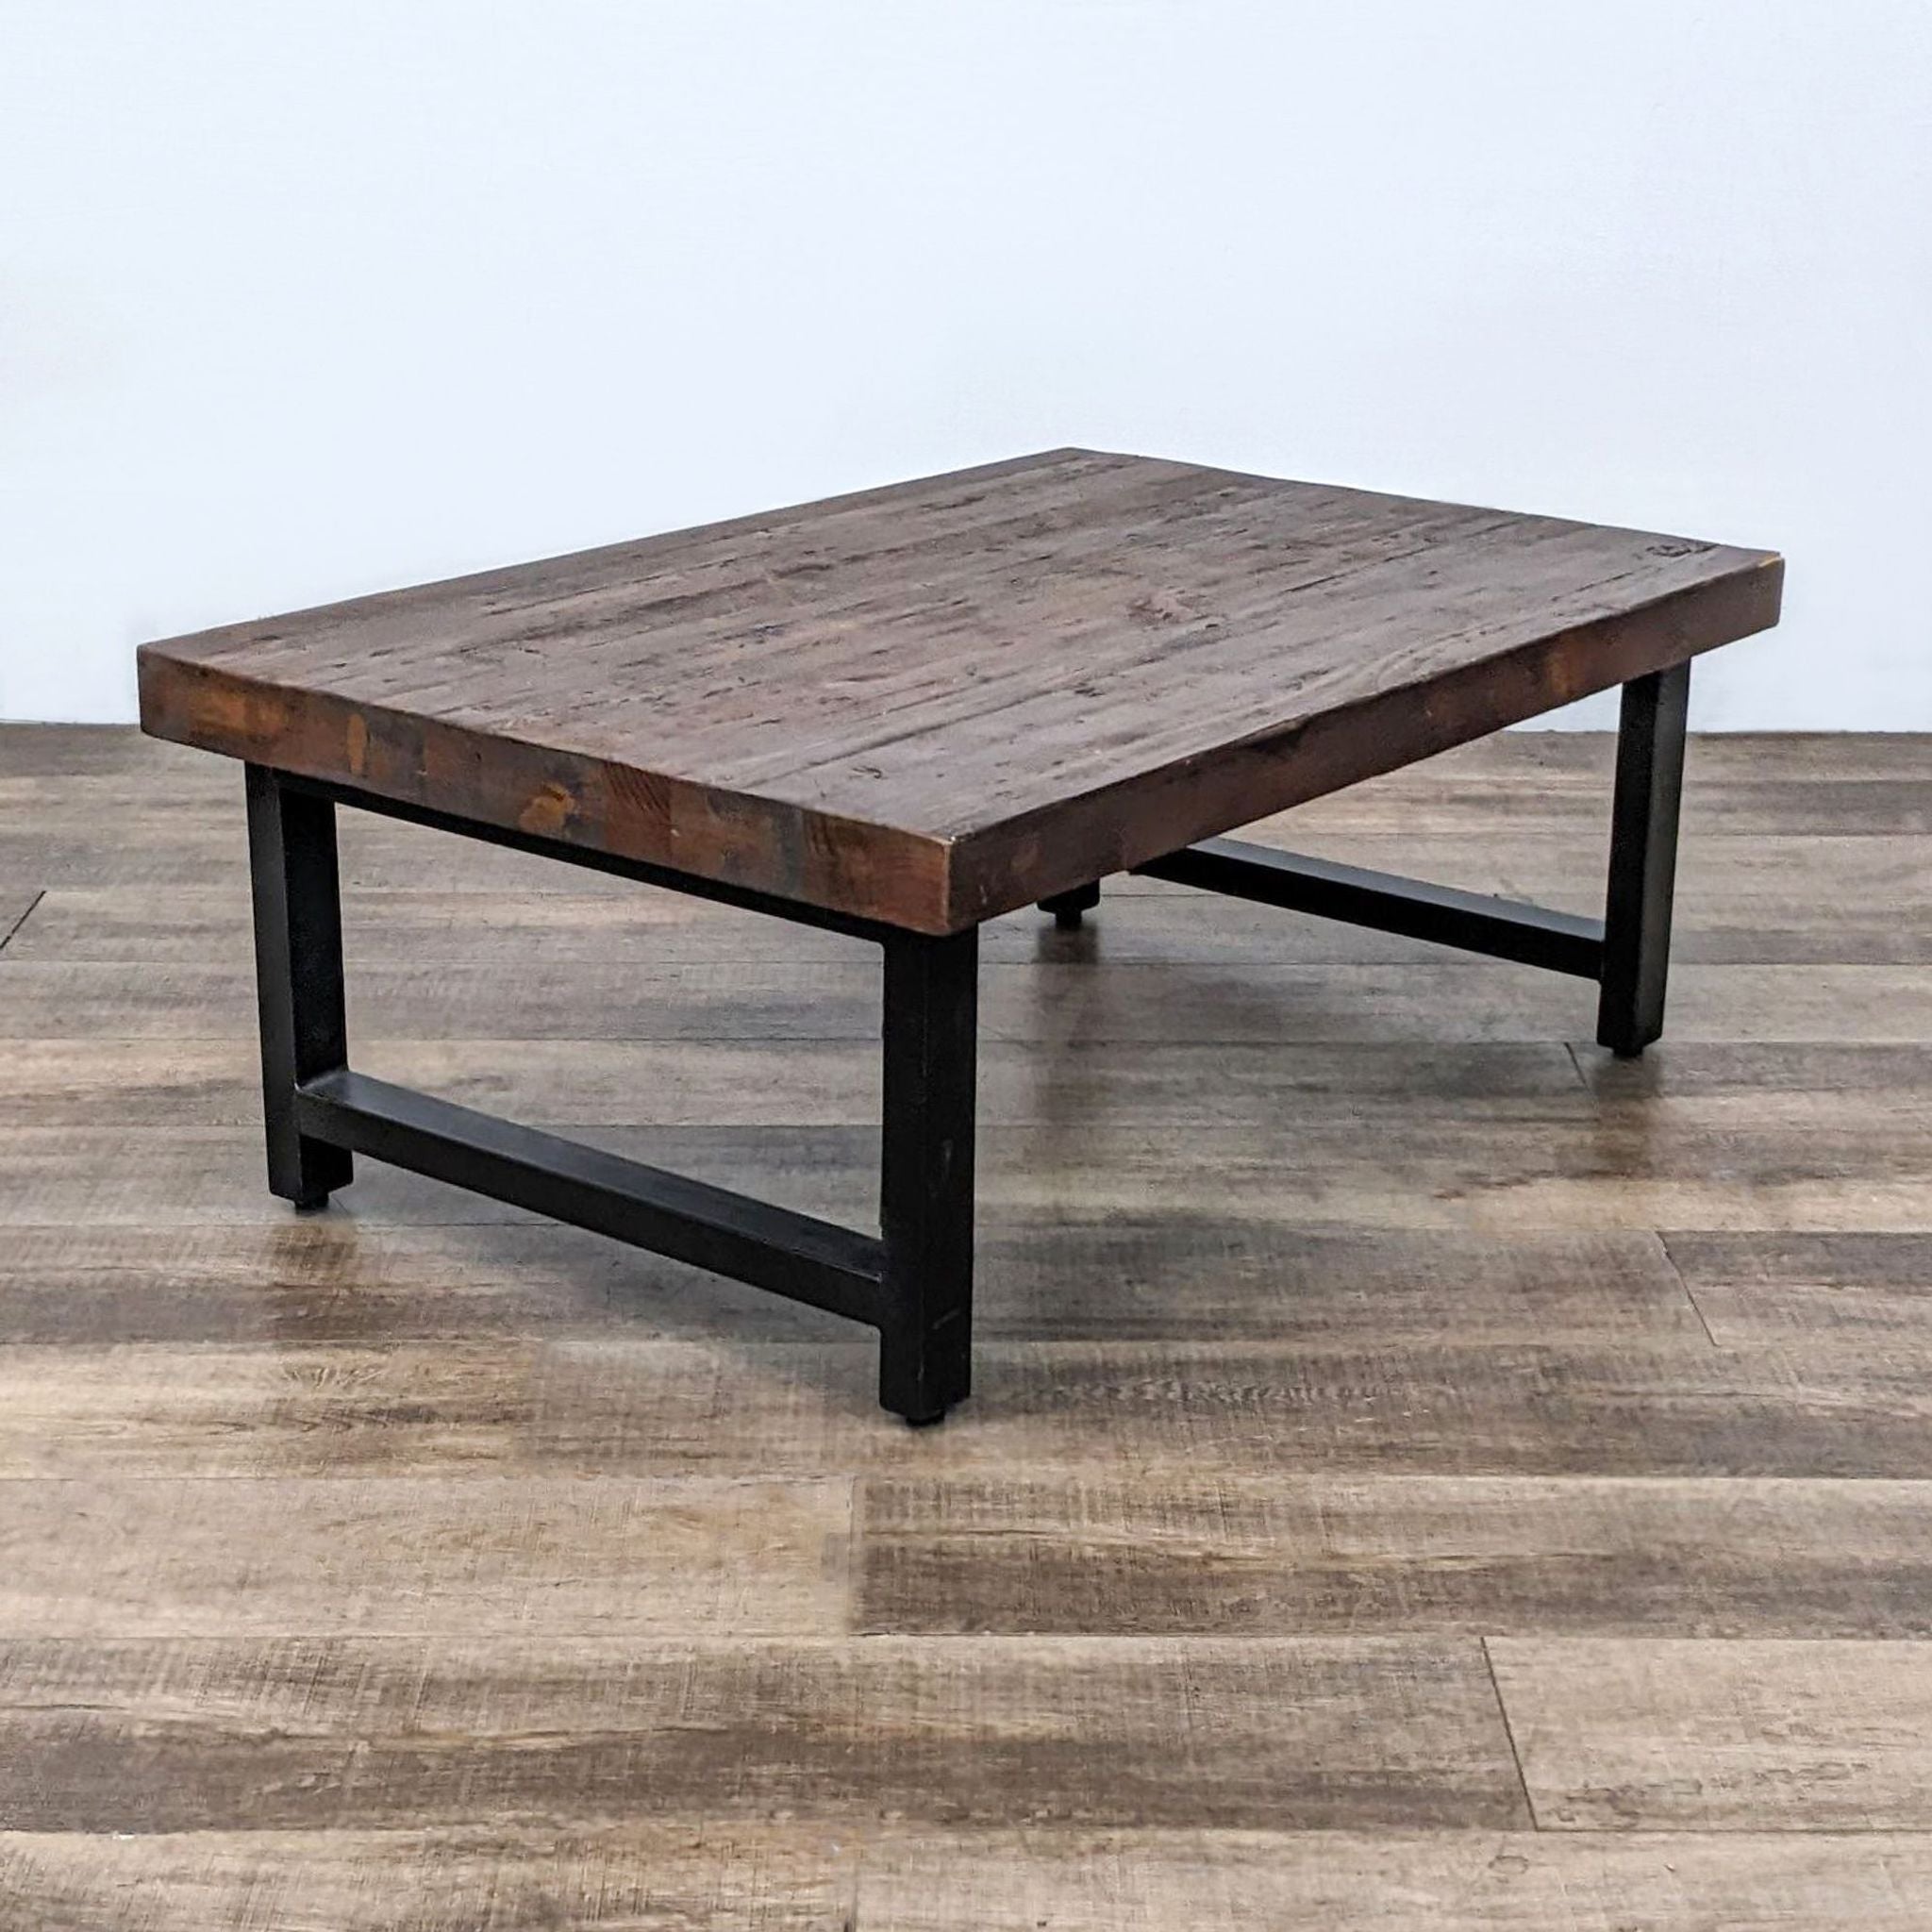 Reclaimed pine wood Reperch coffee table with rustic distressed finish, knots, and black metal legs on a wooden floor.